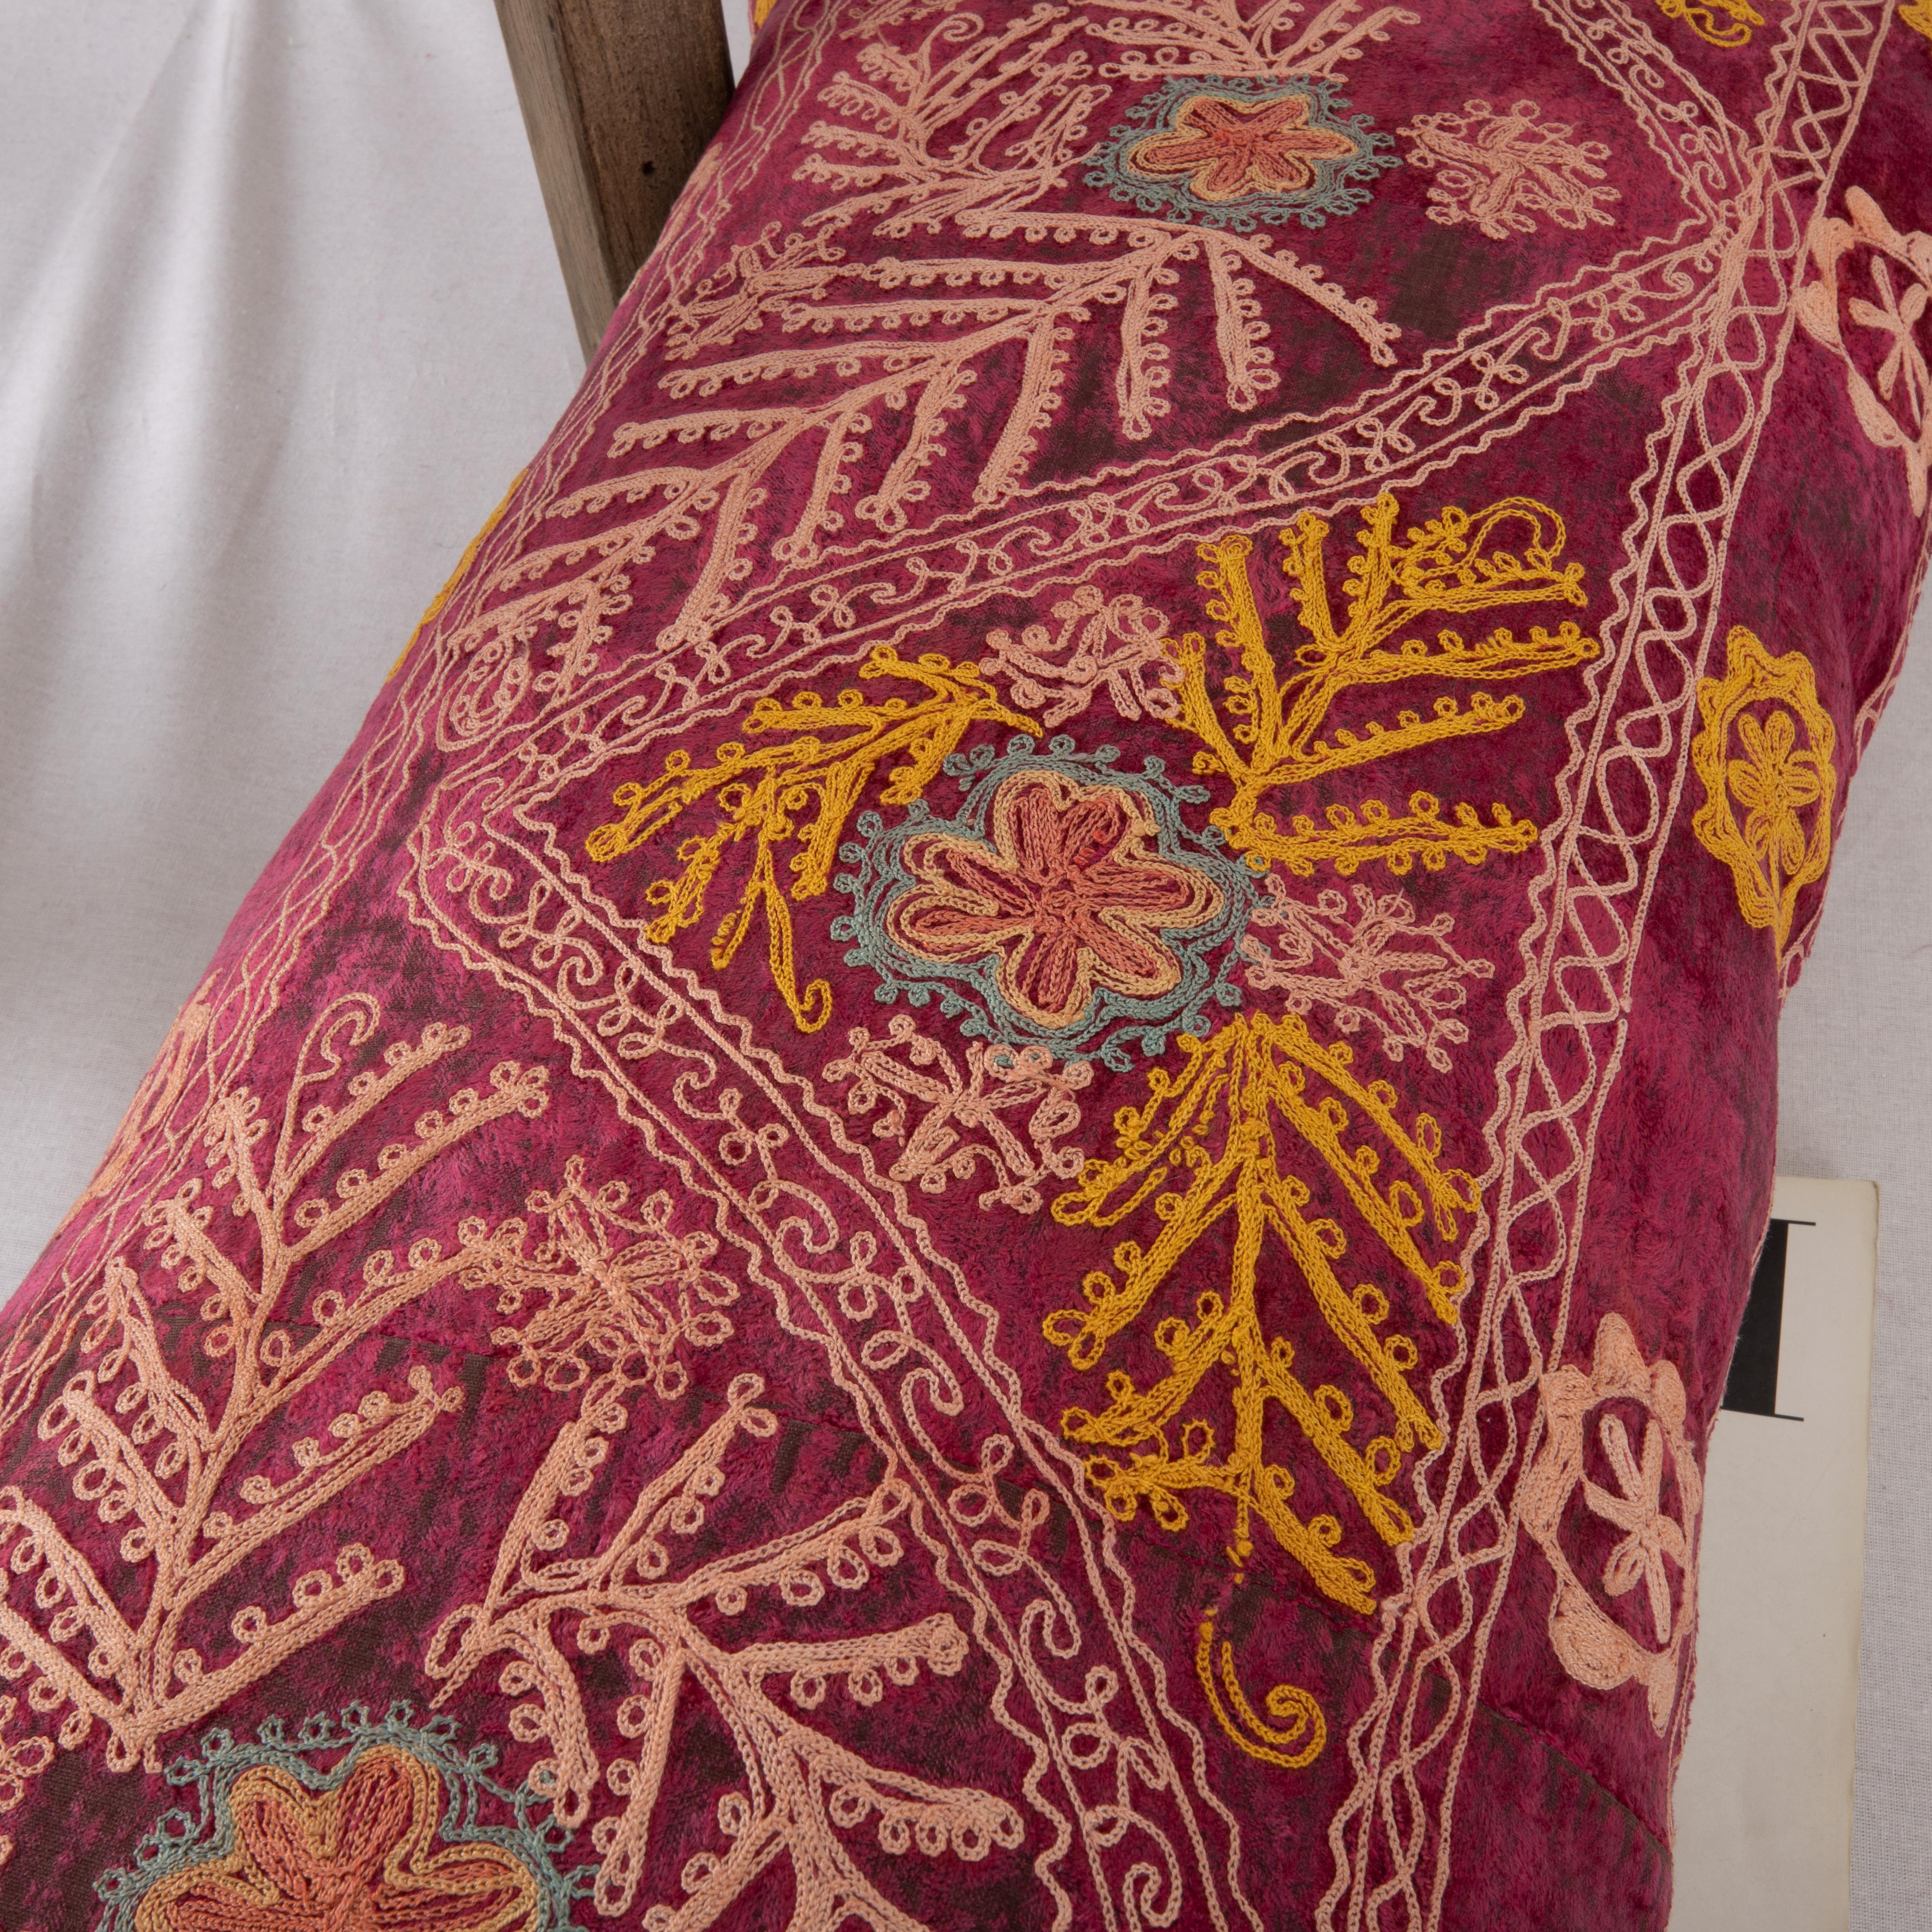 Suzani Pillow Case Made from a Vintage Velvet Ground Suzani, Mid-20th Century For Sale 3